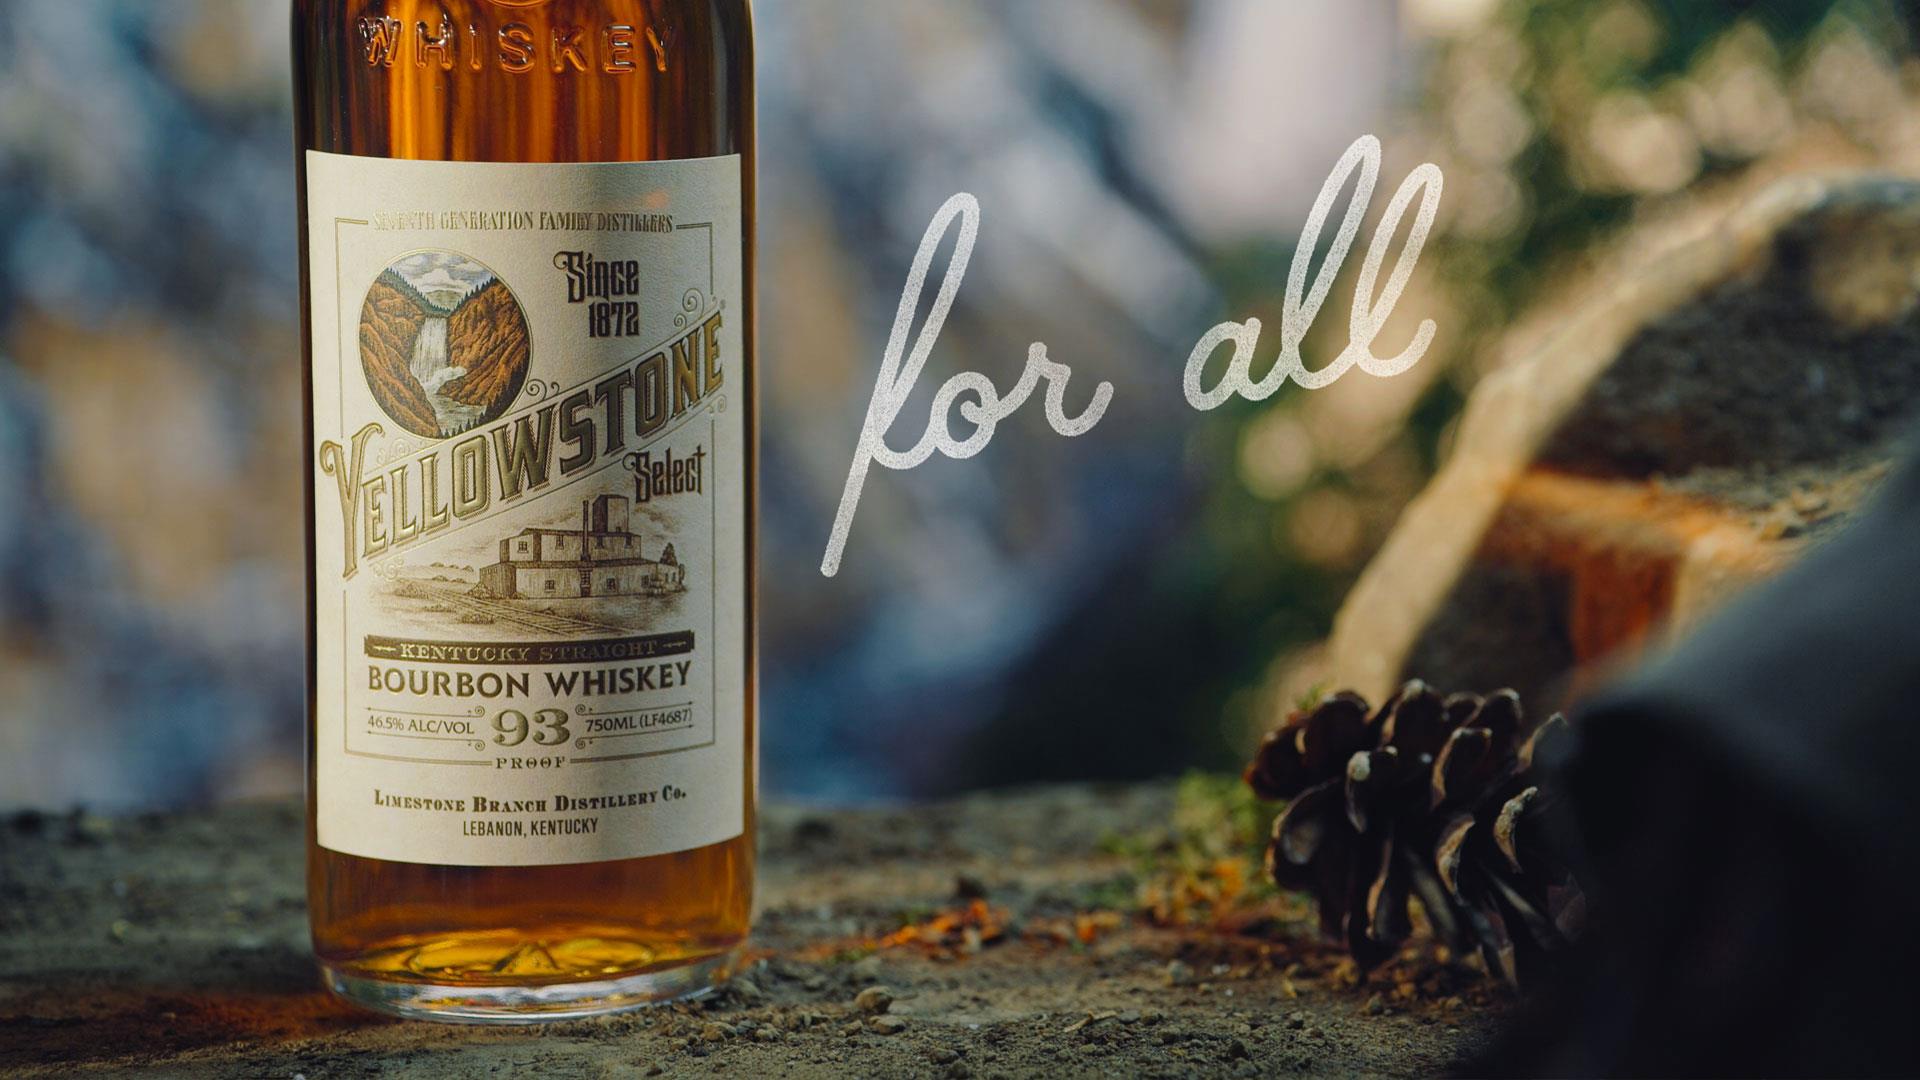 Yellowstone, Bourbon For All